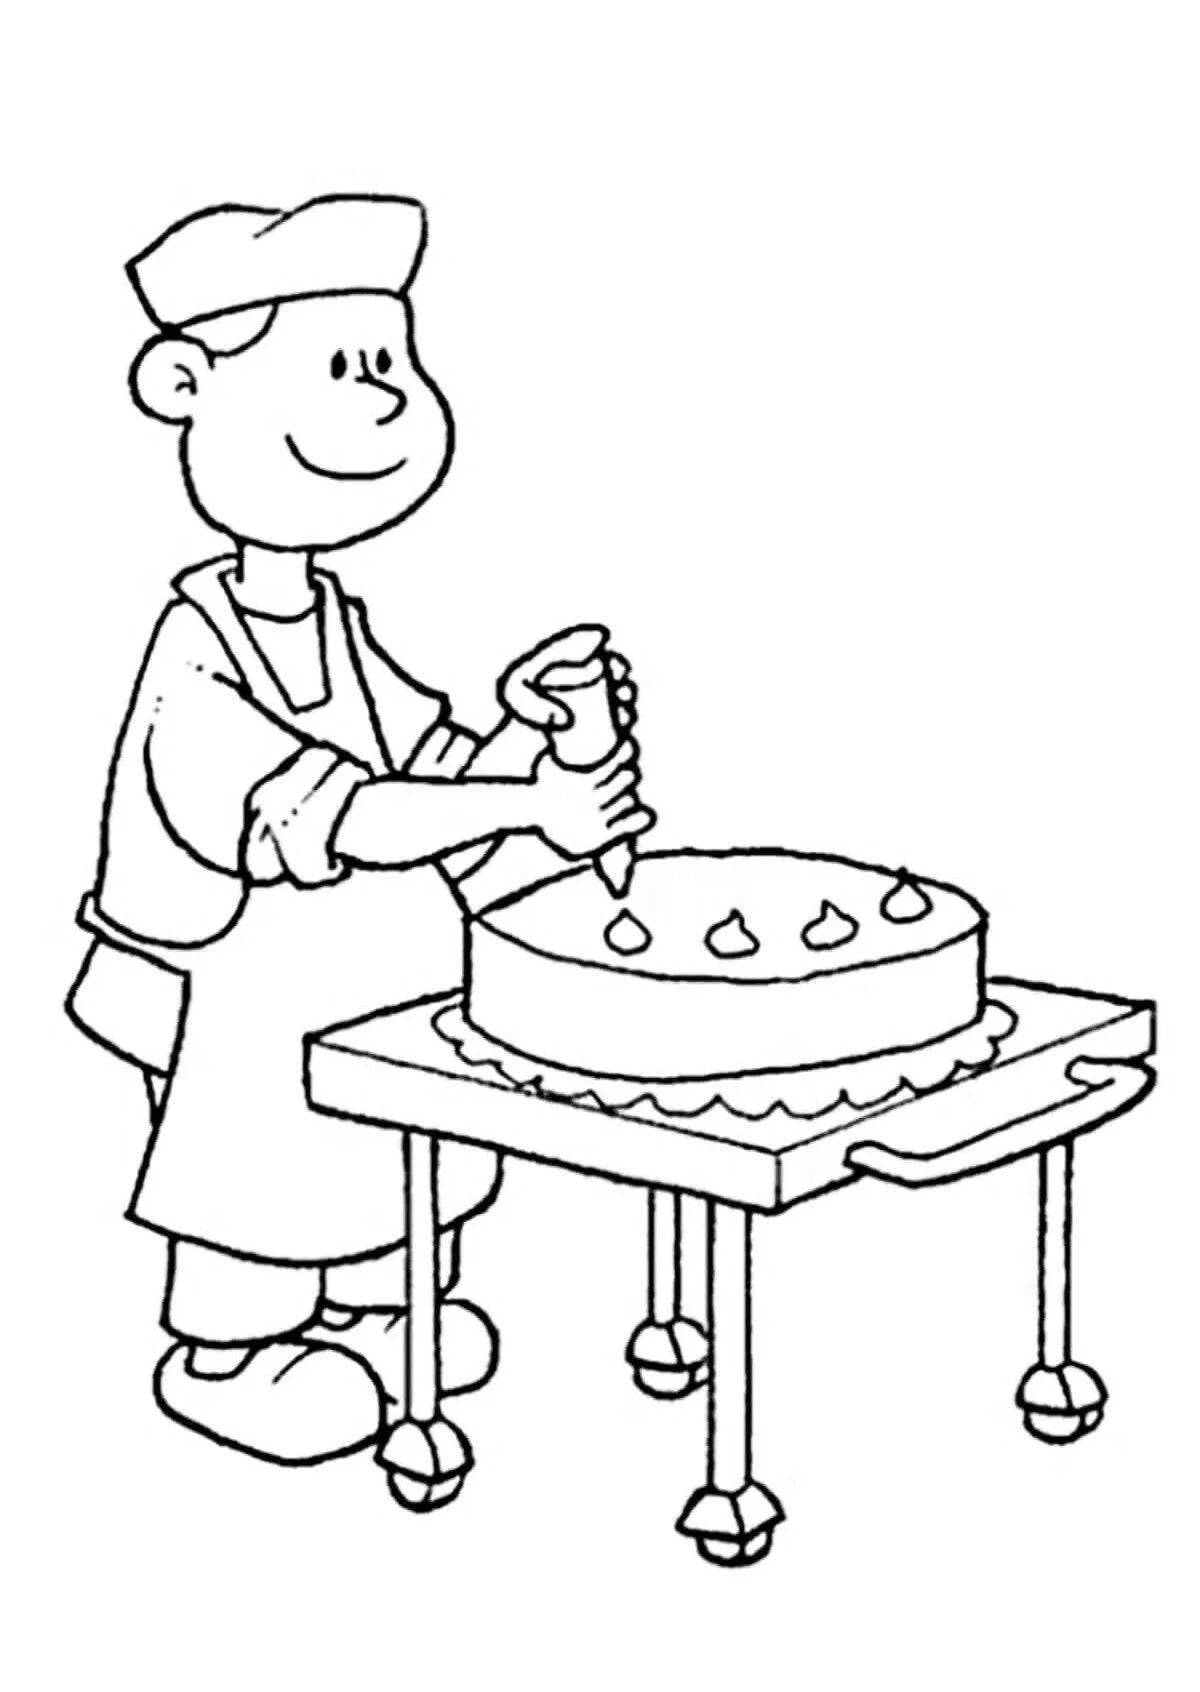 Fun coloring pages for 1st grade professions